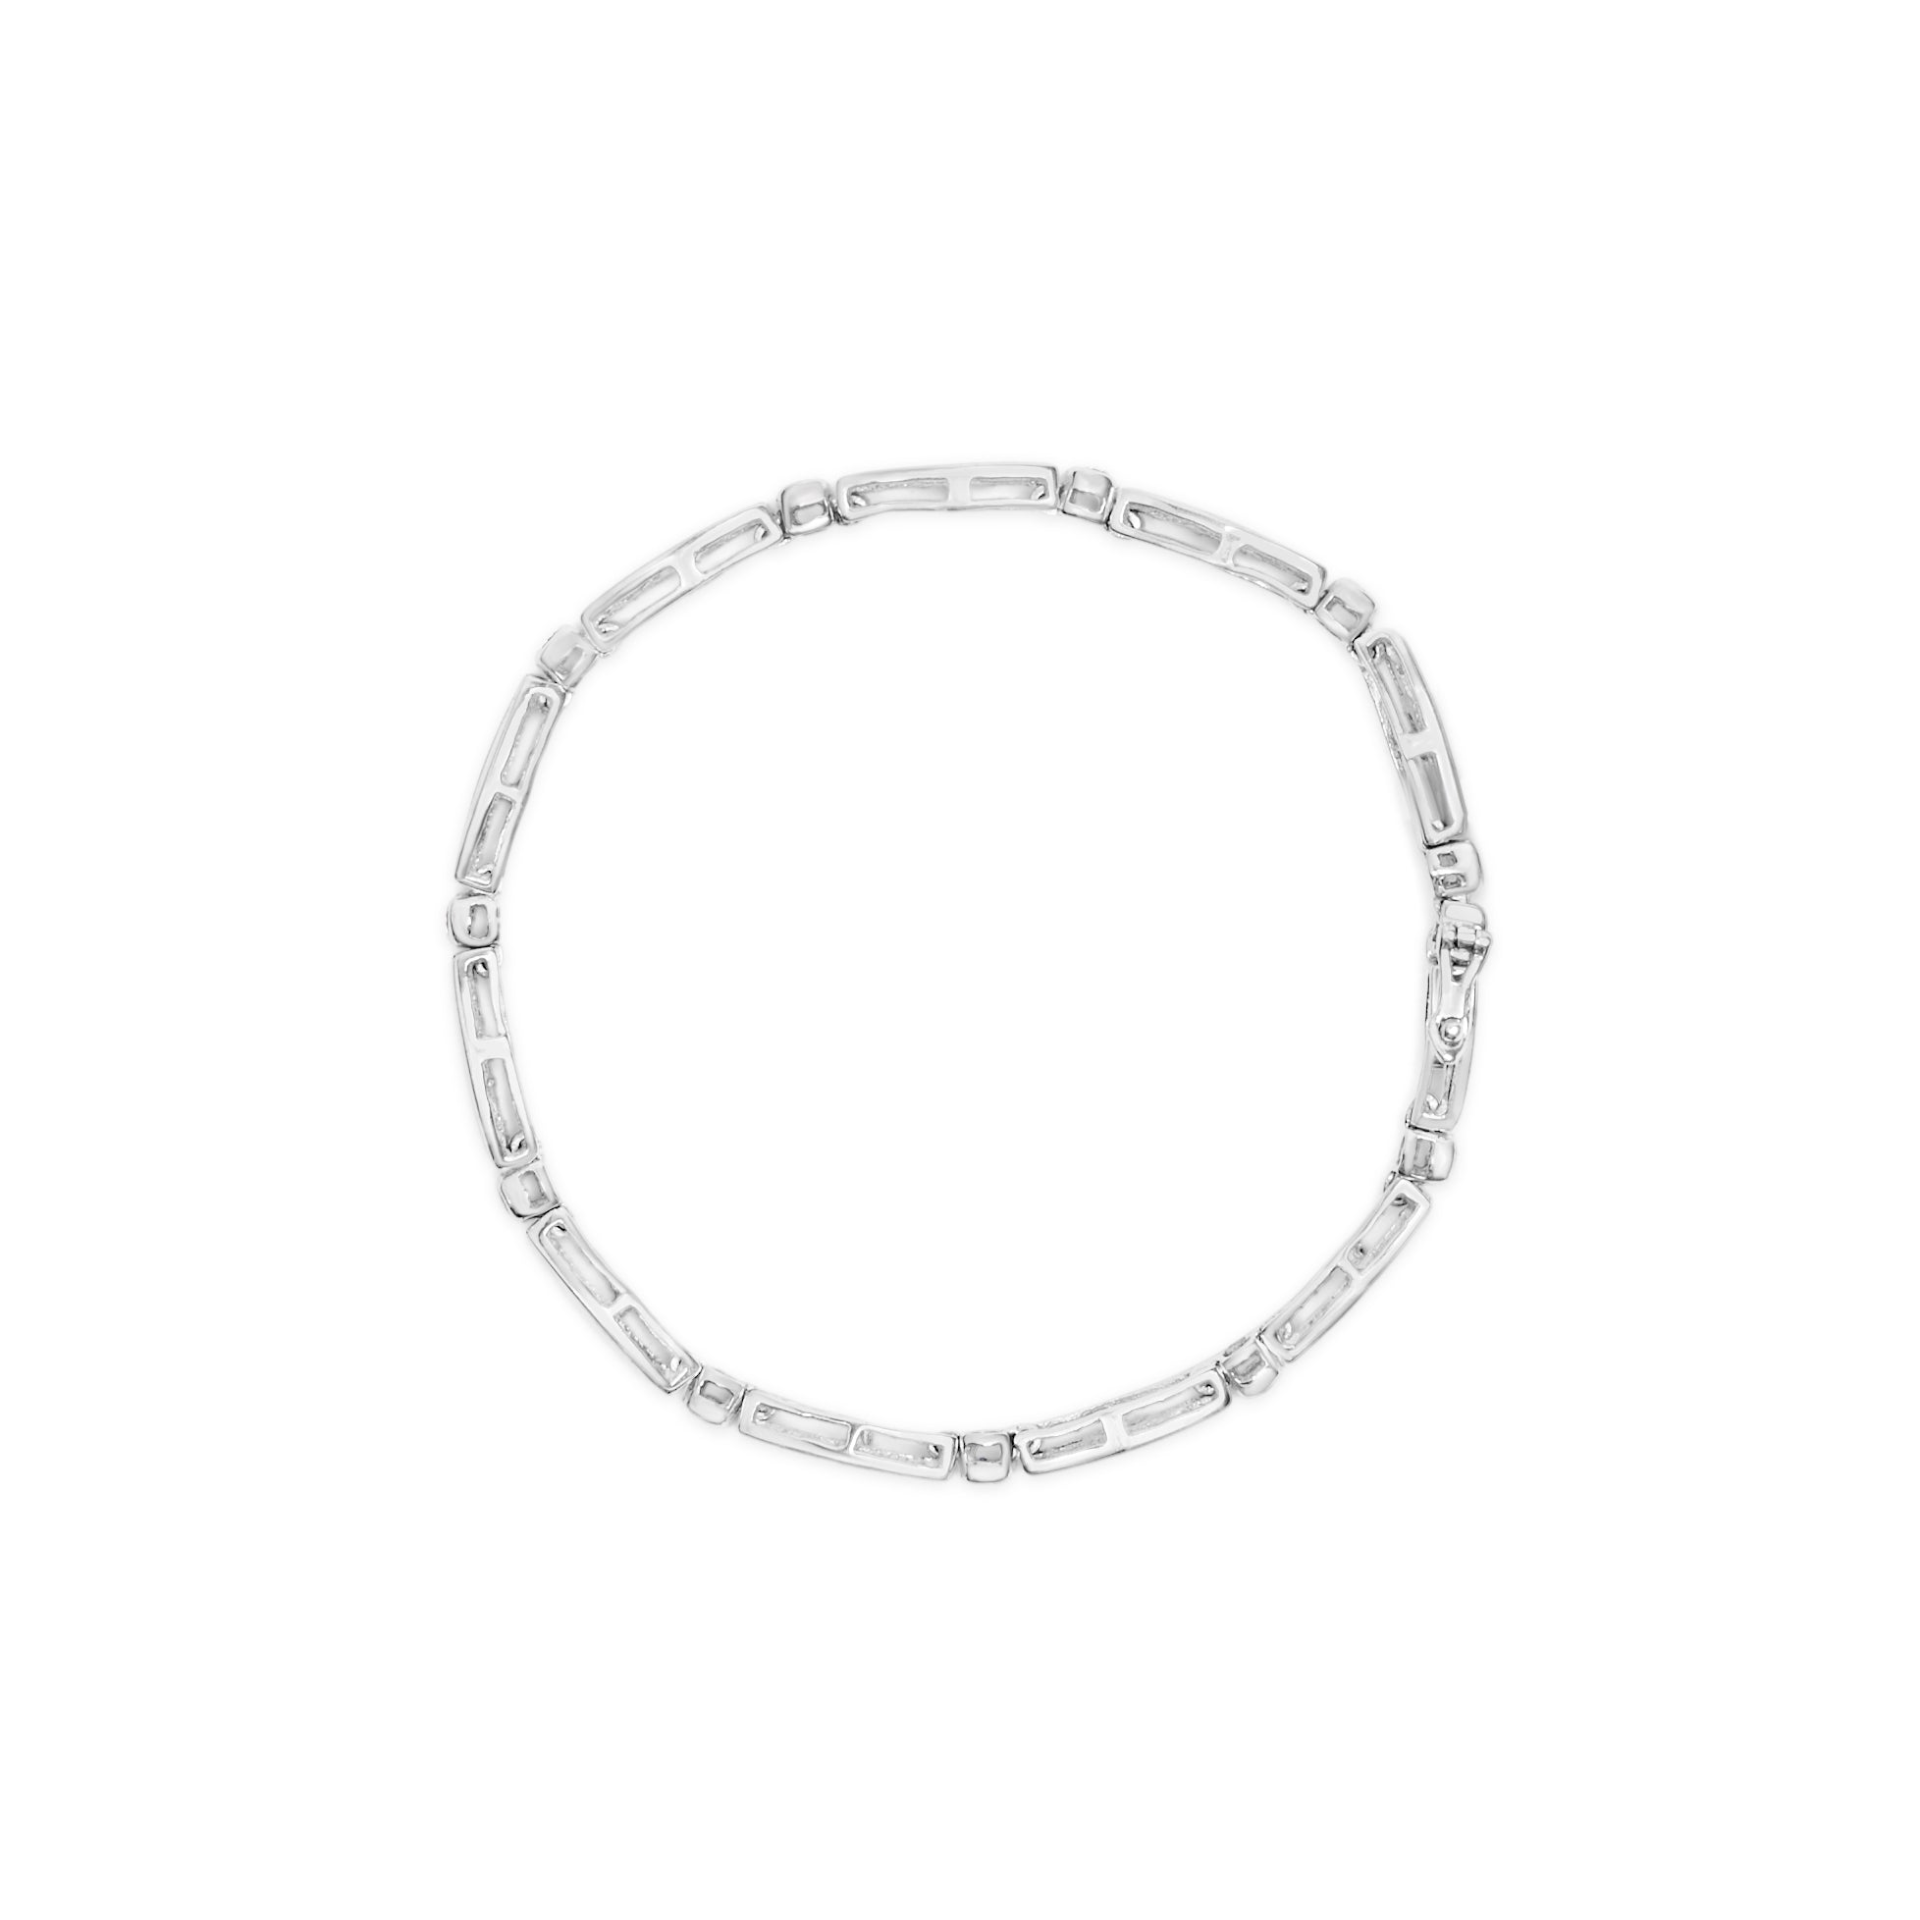 14K White Gold 1-1/2 Cttw Round Brilliant-Cut & Baguette Cut Diamond Bezel and Tapered Link 7" Tennis Bracelet (H-I Color, I1-I2 Clarity), Goodies N Stuff